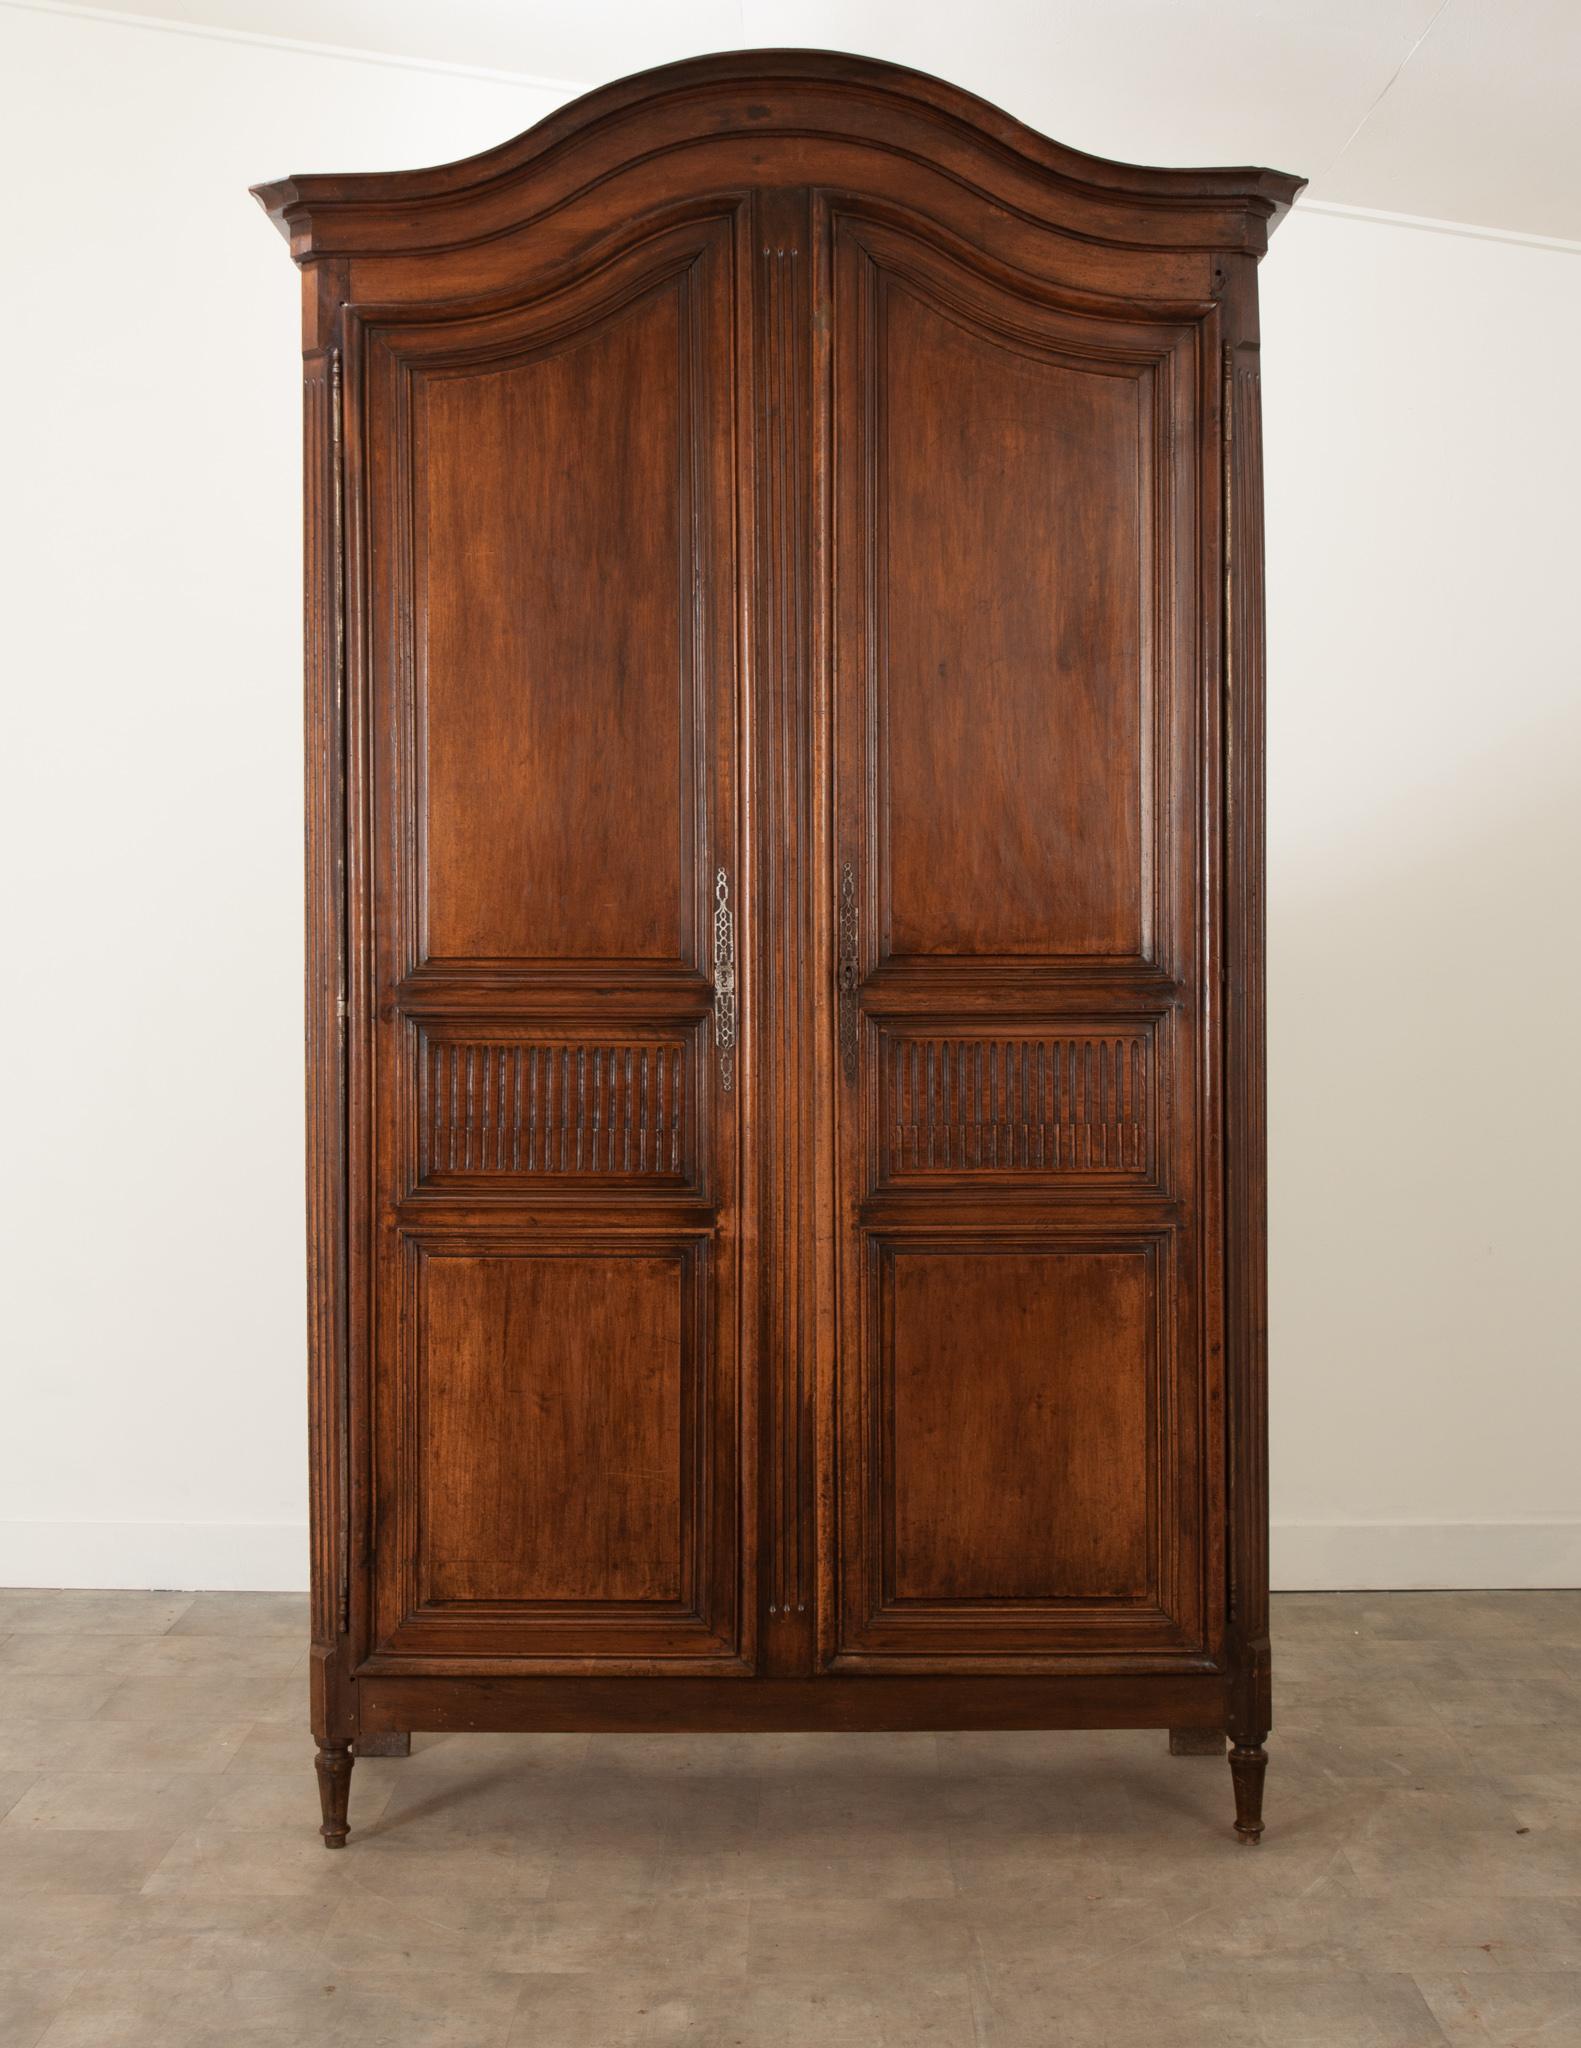 A massive solid walnut armoire from France, crafted during the 1840s. A chapeau de la champ cornice tops the armoire, heighting it to over 9 feet tall. The shapely paneled doors feature simple geometric carvings and hang on impressive steel barrel